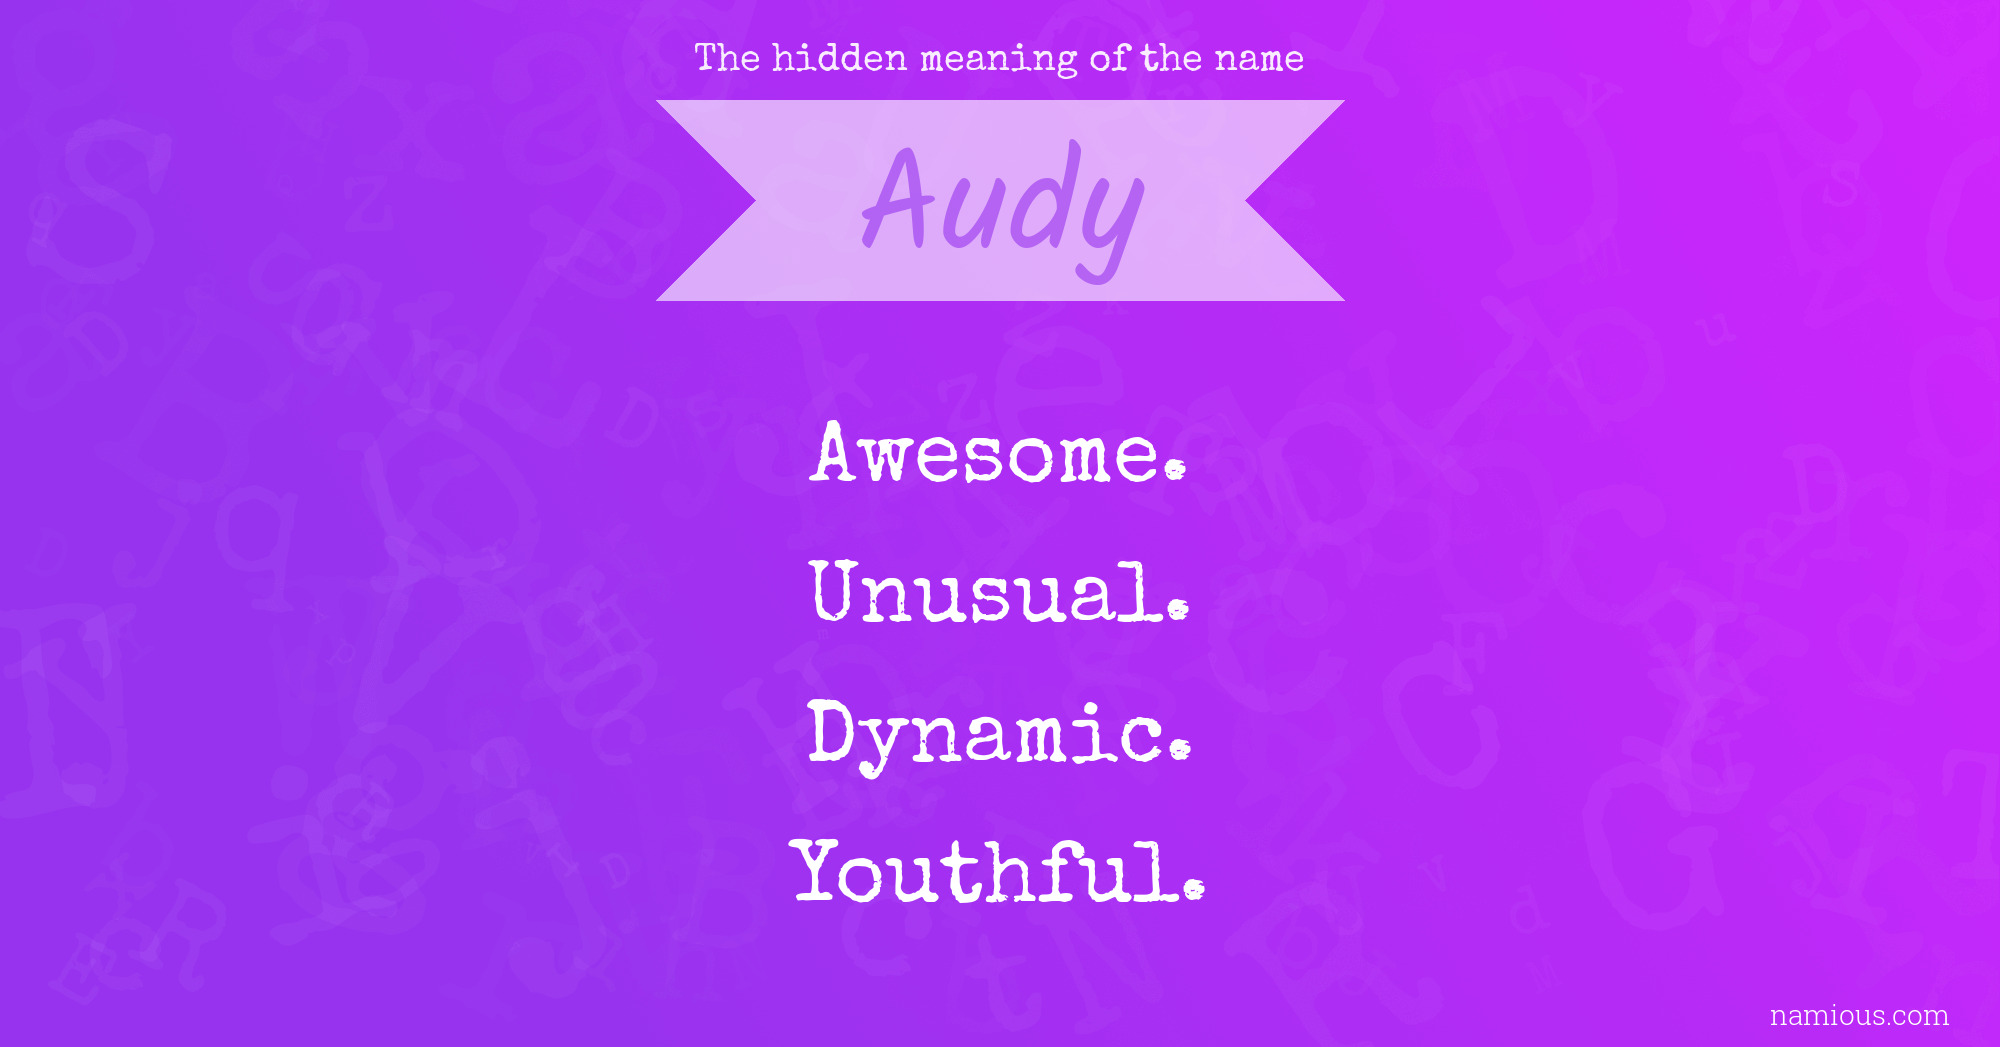 The hidden meaning of the name Audy